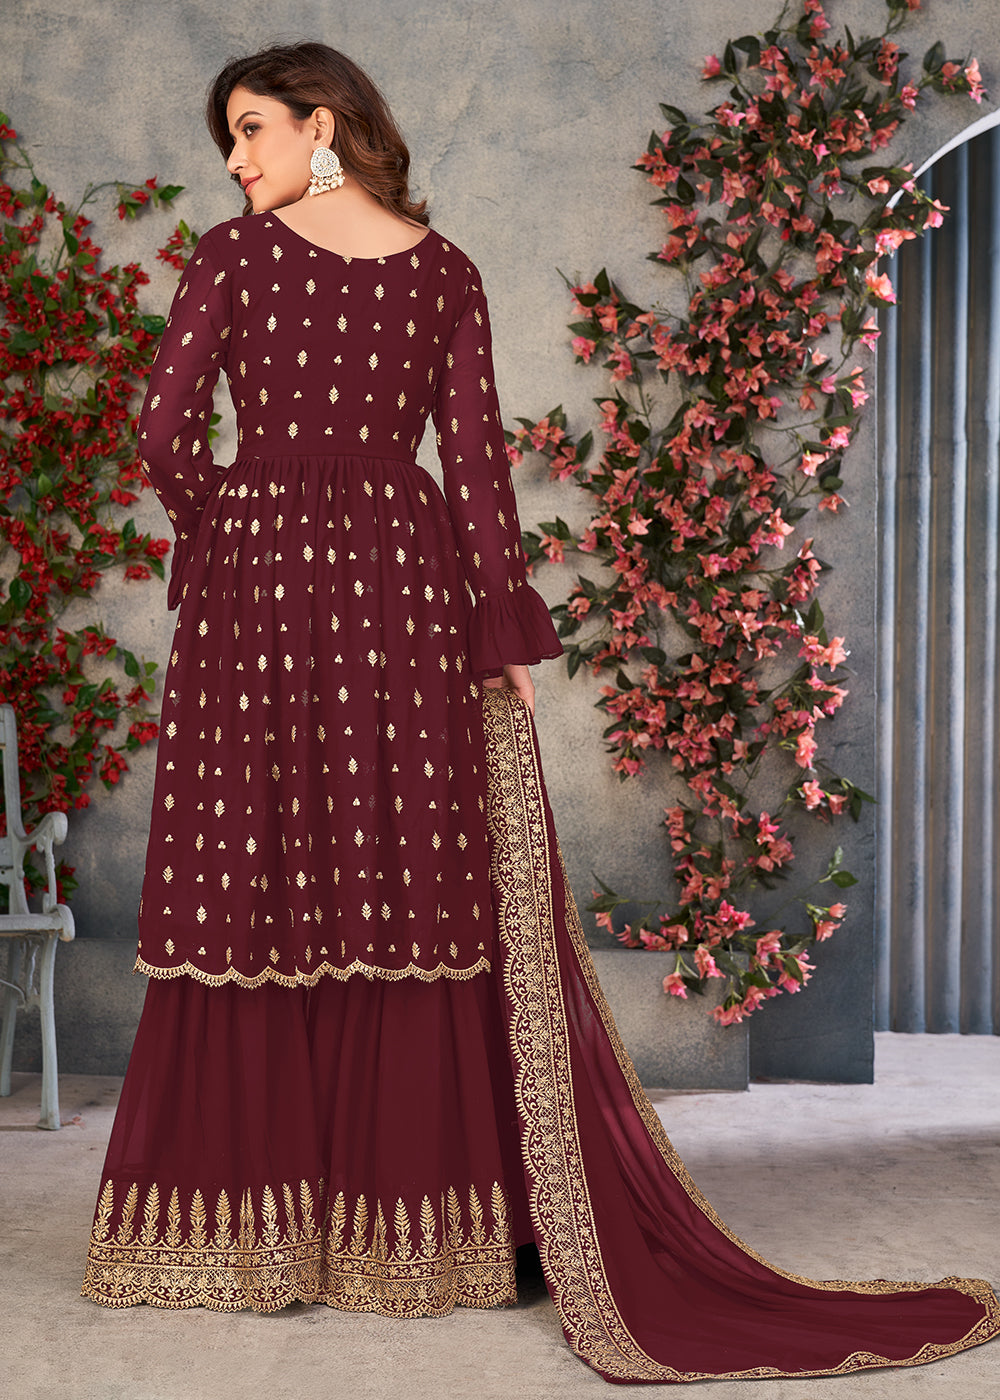 Shop Now Marvelous Maroon Georgette Sangeet Wear Sharara Suit Online at Empress Clothing in USA, UK, Canada, Germany & Worldwide.